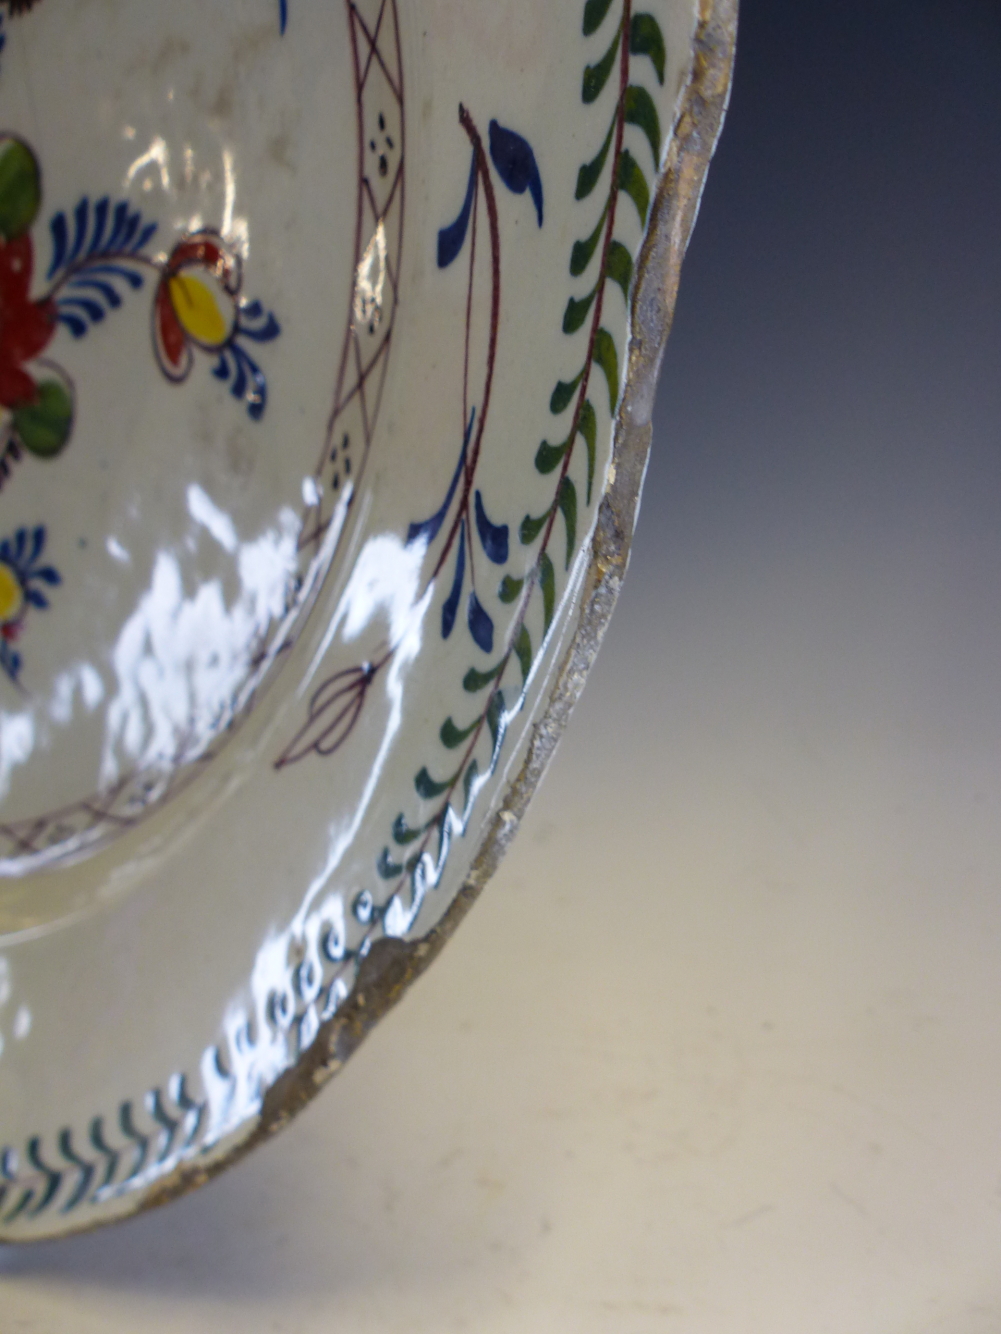 A PAIR OF MID 18th C. ENGLISH POLYCHROME DELFT DISHES PAINTED WITH CENTRAL SPRAYS OF FLOWERS - Image 6 of 20